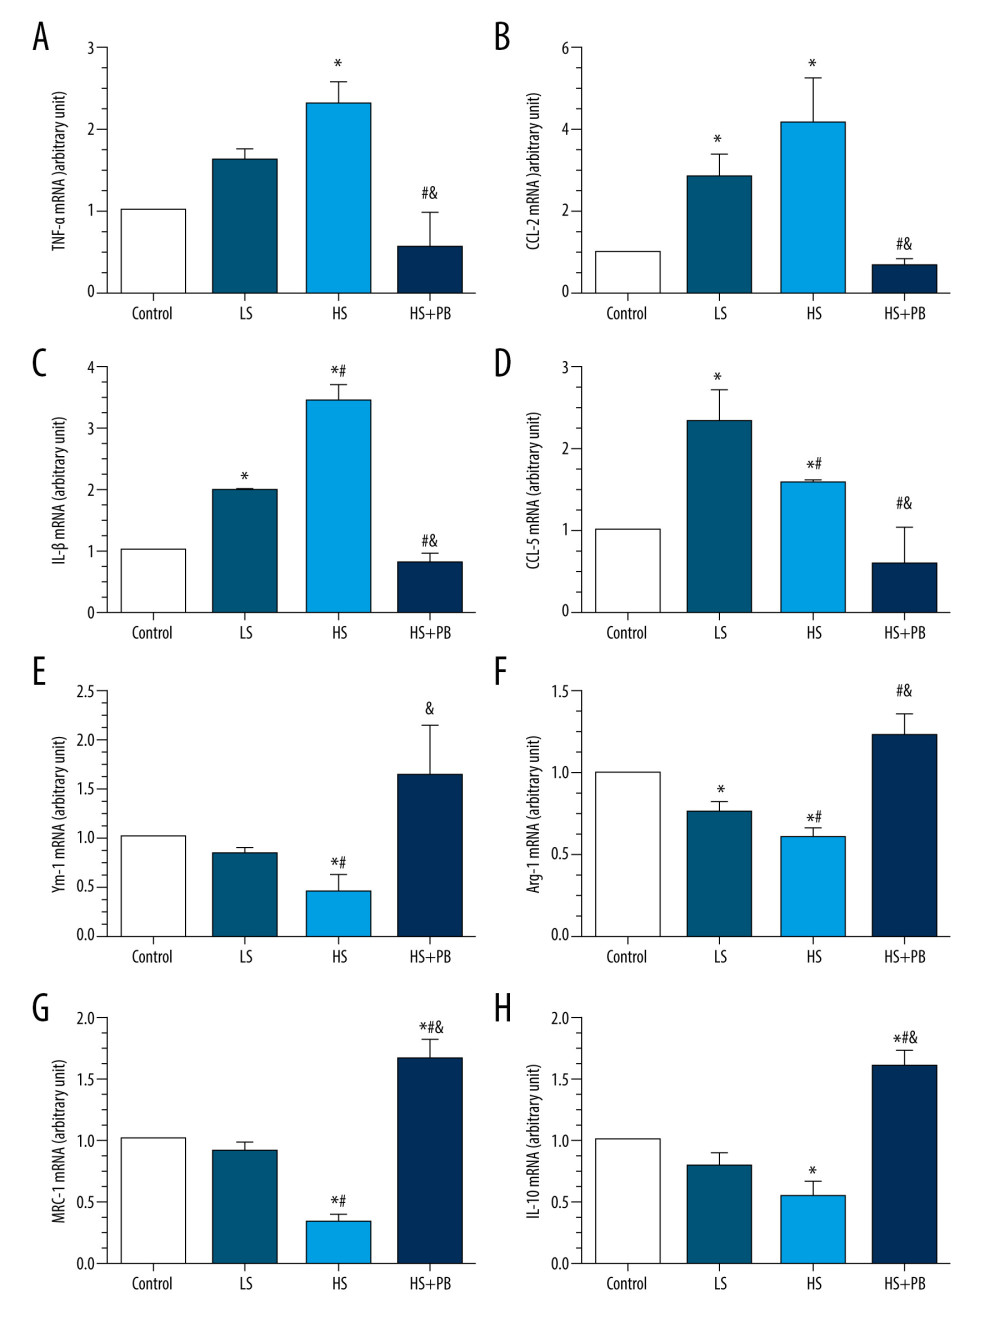 (A–H) The mRNA expression levels of macrophage phenotype-related inflammatory factors in different groups. Values displayed are mean±SD (n=3 per group). * P<0.05 vs control group, # P<0.05 vs LS group, & P<0.05 vs HS group. HS – high salt; LS – low salt